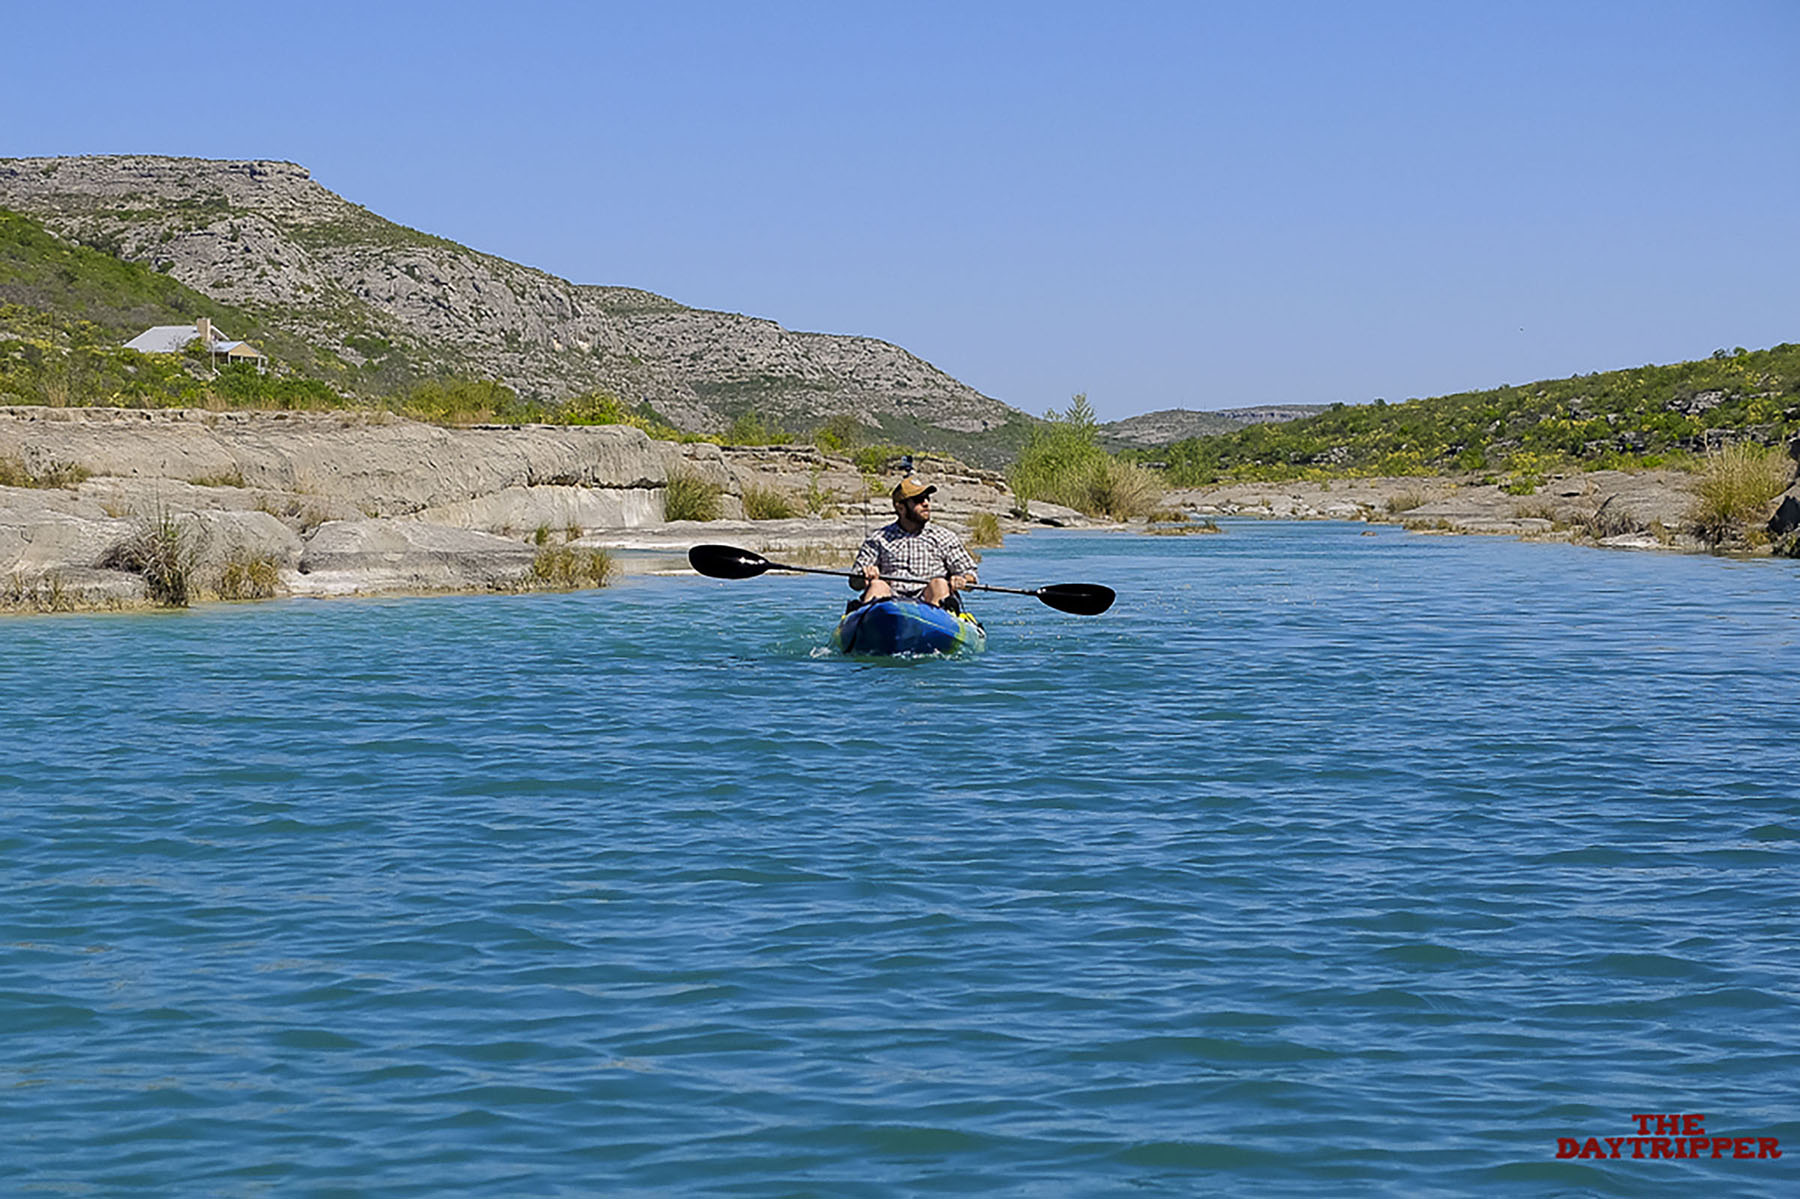 A man paddles a kayak down bright blue water with a hilly desert landscape in the background